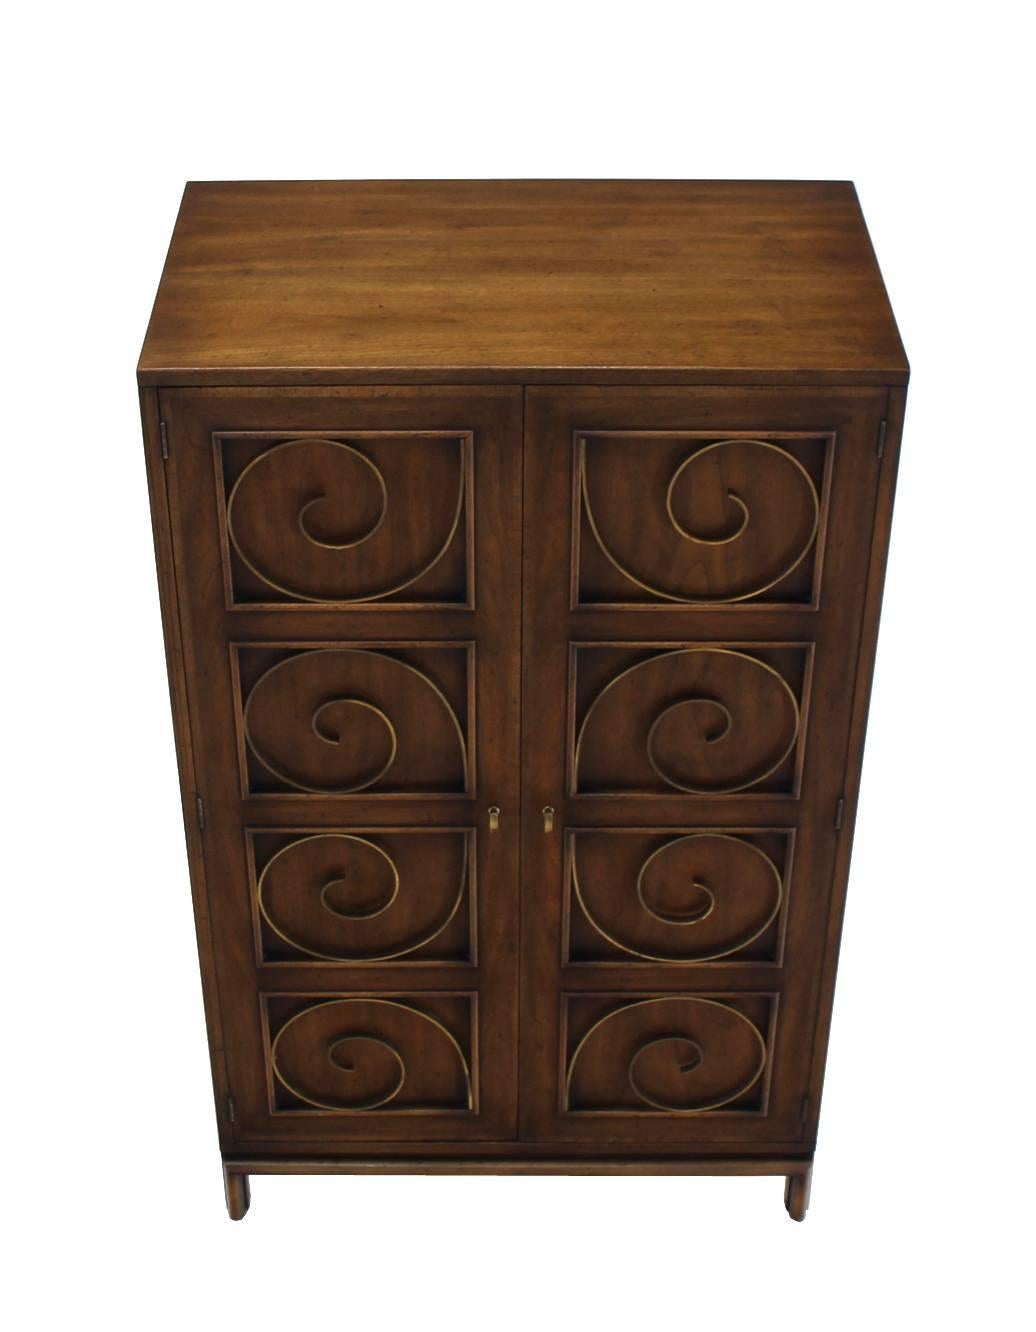 Very decorative high quality walnut finish blanket chest or cabinet with three drawers in style of Edmond Spence. The front doors are neatly decorated with solid brass scrolls.